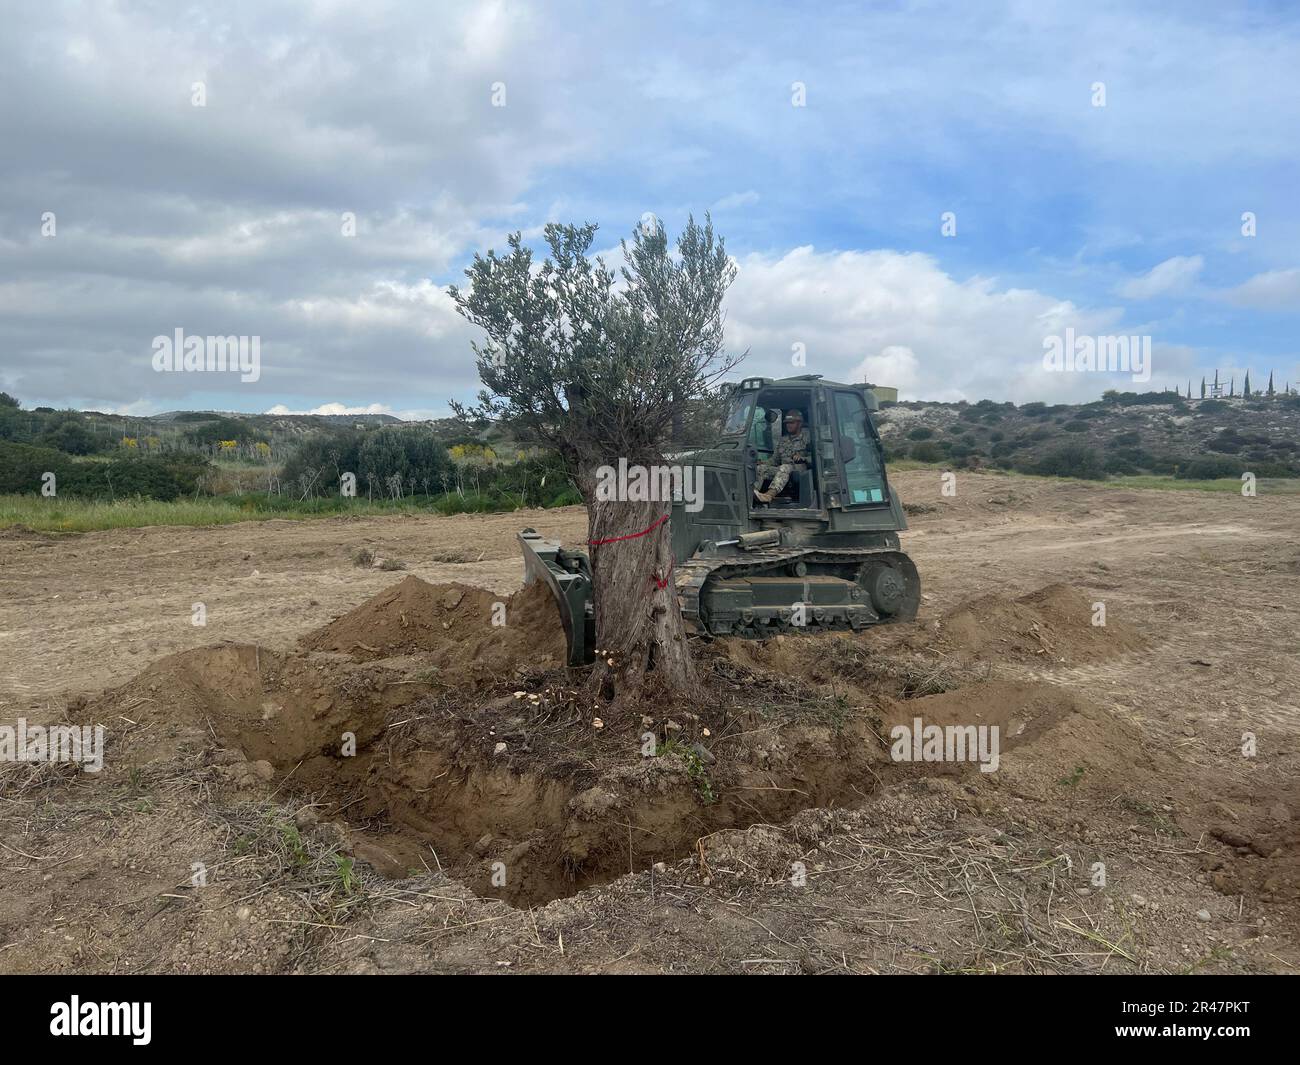 MARI, Cyprus (Mar. 15, 2023) Equipment Operator 3rd Class devonte Catapang, from Tanuning, Guam, assigned to Naval Mobile Construction Battalion (NMCB) 1. Operates D6 Dozer to remove dirt around the base of the tree to properly de-root the tree to be able to safely relocate host nation olive trees. NMCB 1 operates as a part of Navy Expeditionary Combat Command and is assigned to Commander, Task Force 68 for deployment across the U.S. Naval Forces Europe-Africa area of operations to defend U.S., allied, and partner interests. Stock Photo